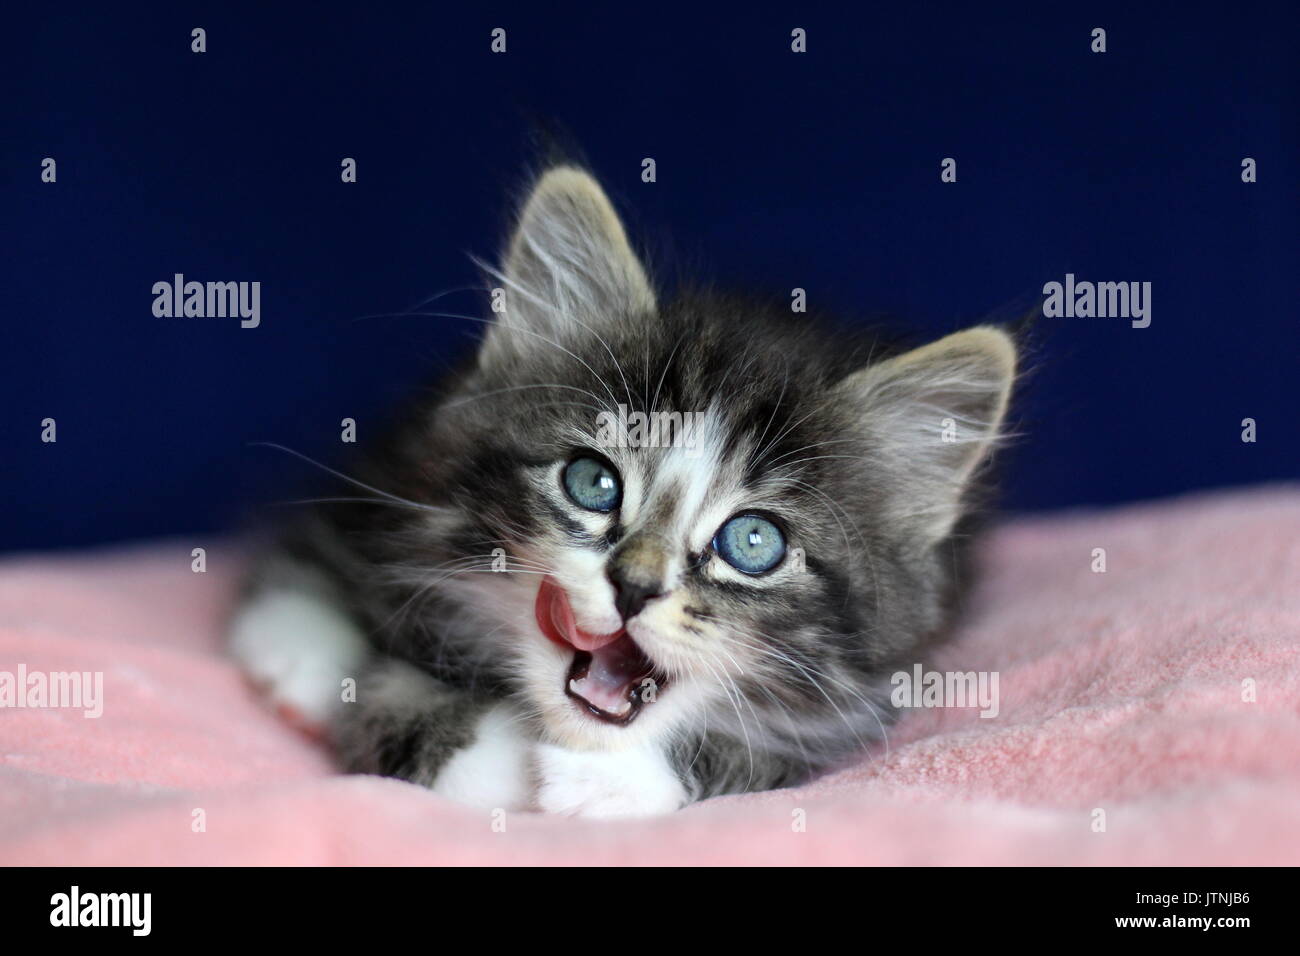 A small Norwegian kitten tabby gray black and white In lying position that licks mustache on pink cushion and blue background Stock Photo